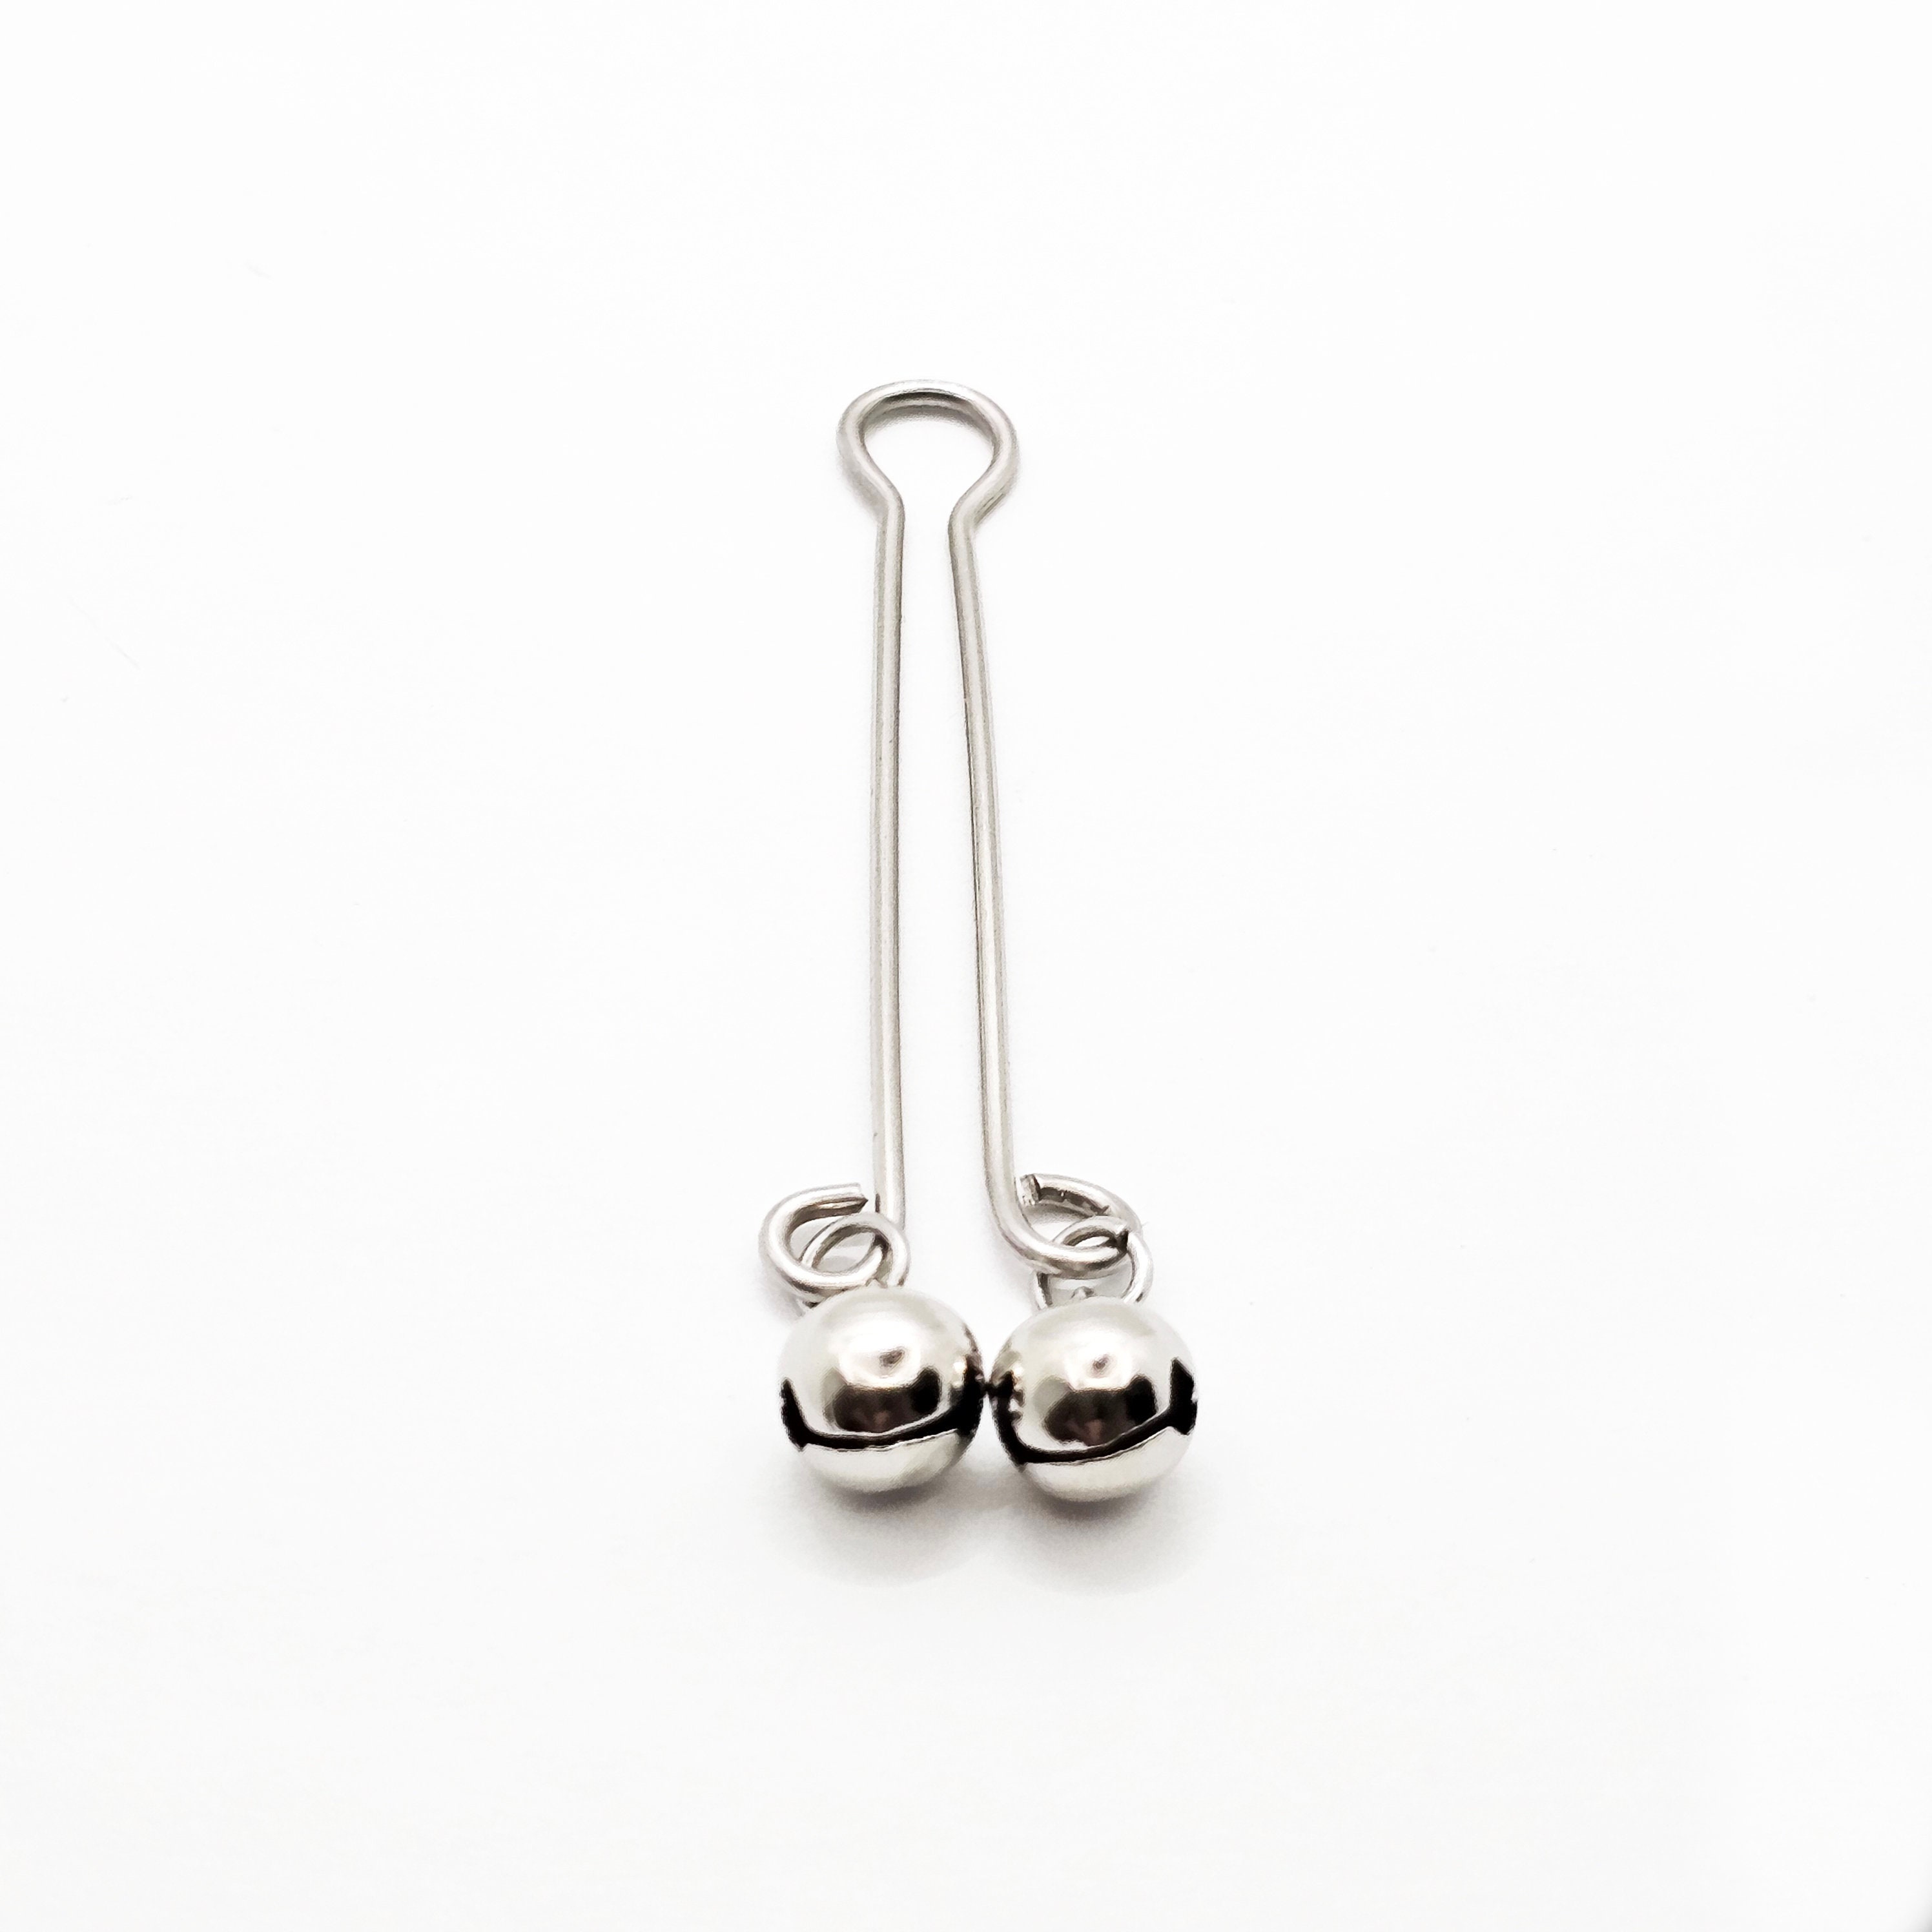 Labia Clip with Bells, Stainless Steel. Non Piercing Vaginal Jewelry, MATURE, BDSM photo